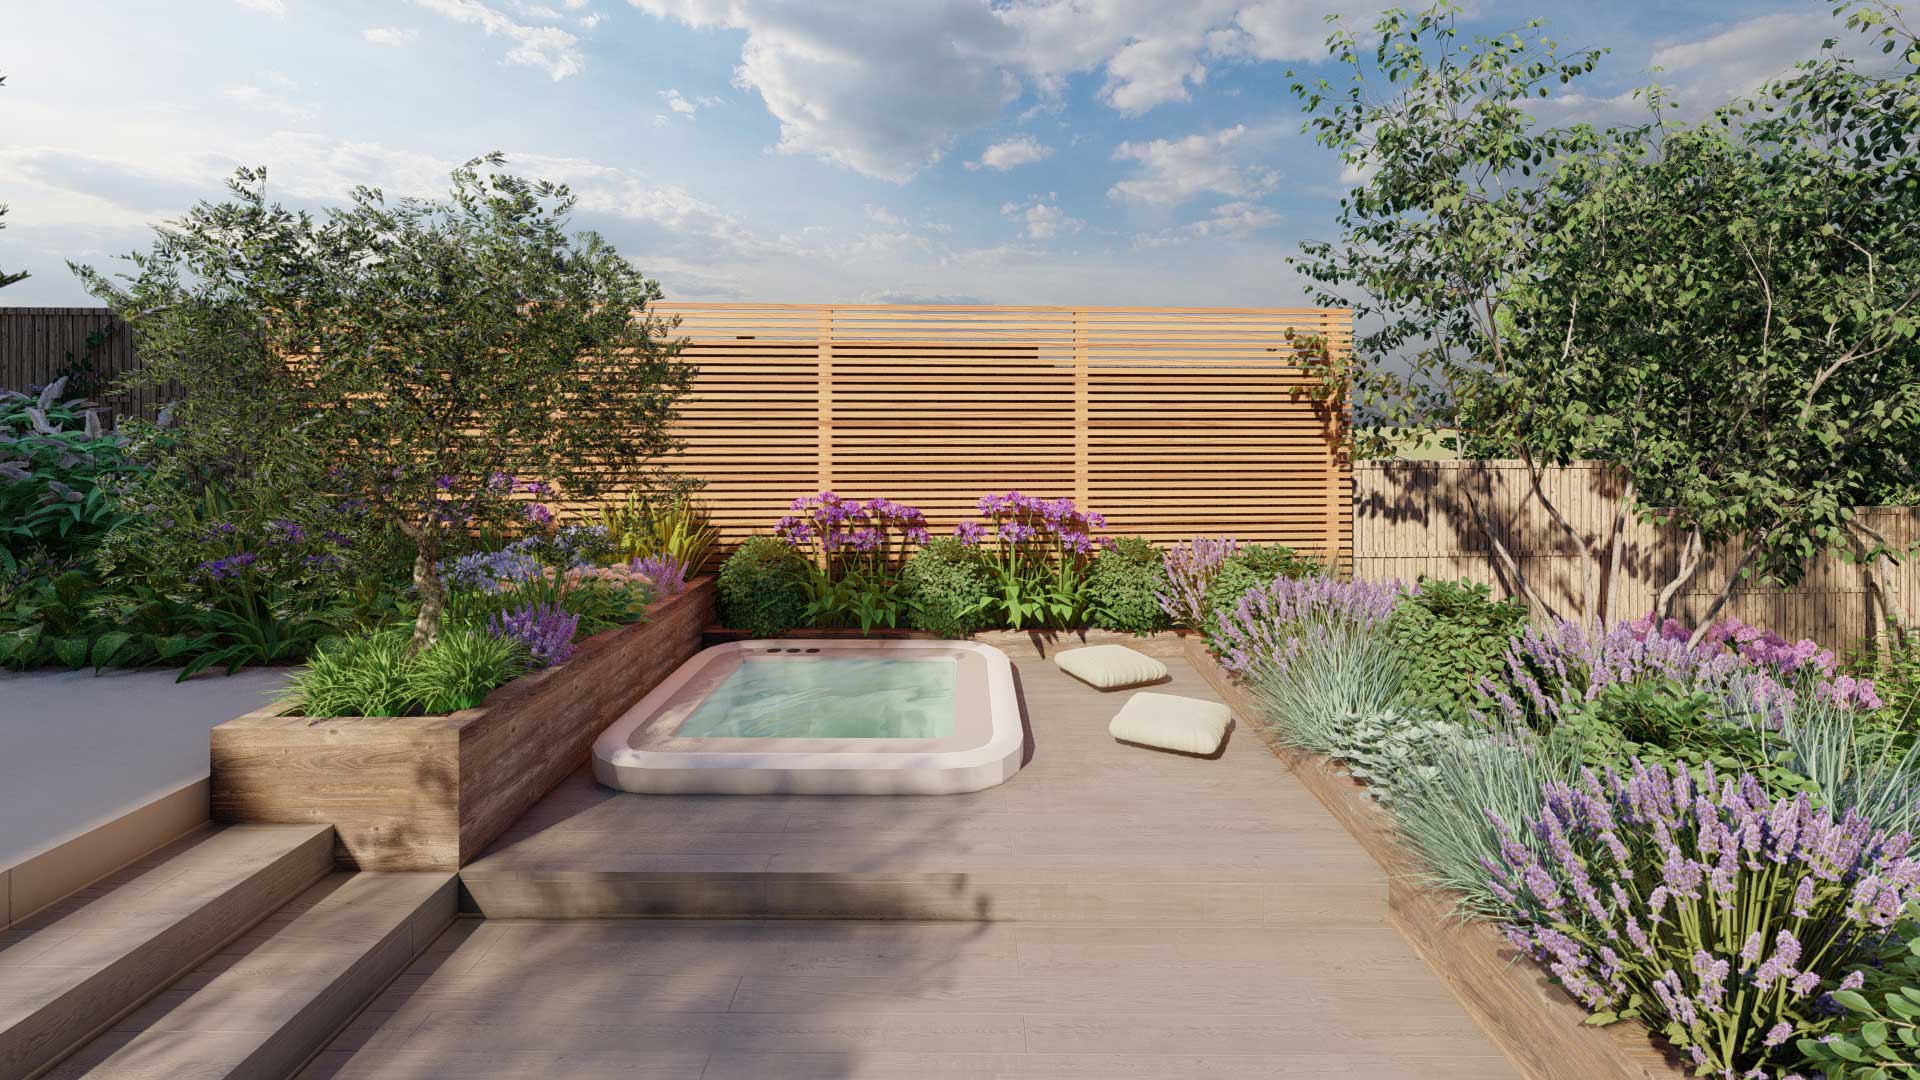 Garden design idea with a small hot tub that is sunk into a millboard decking and a venetian fence behind it for privacy